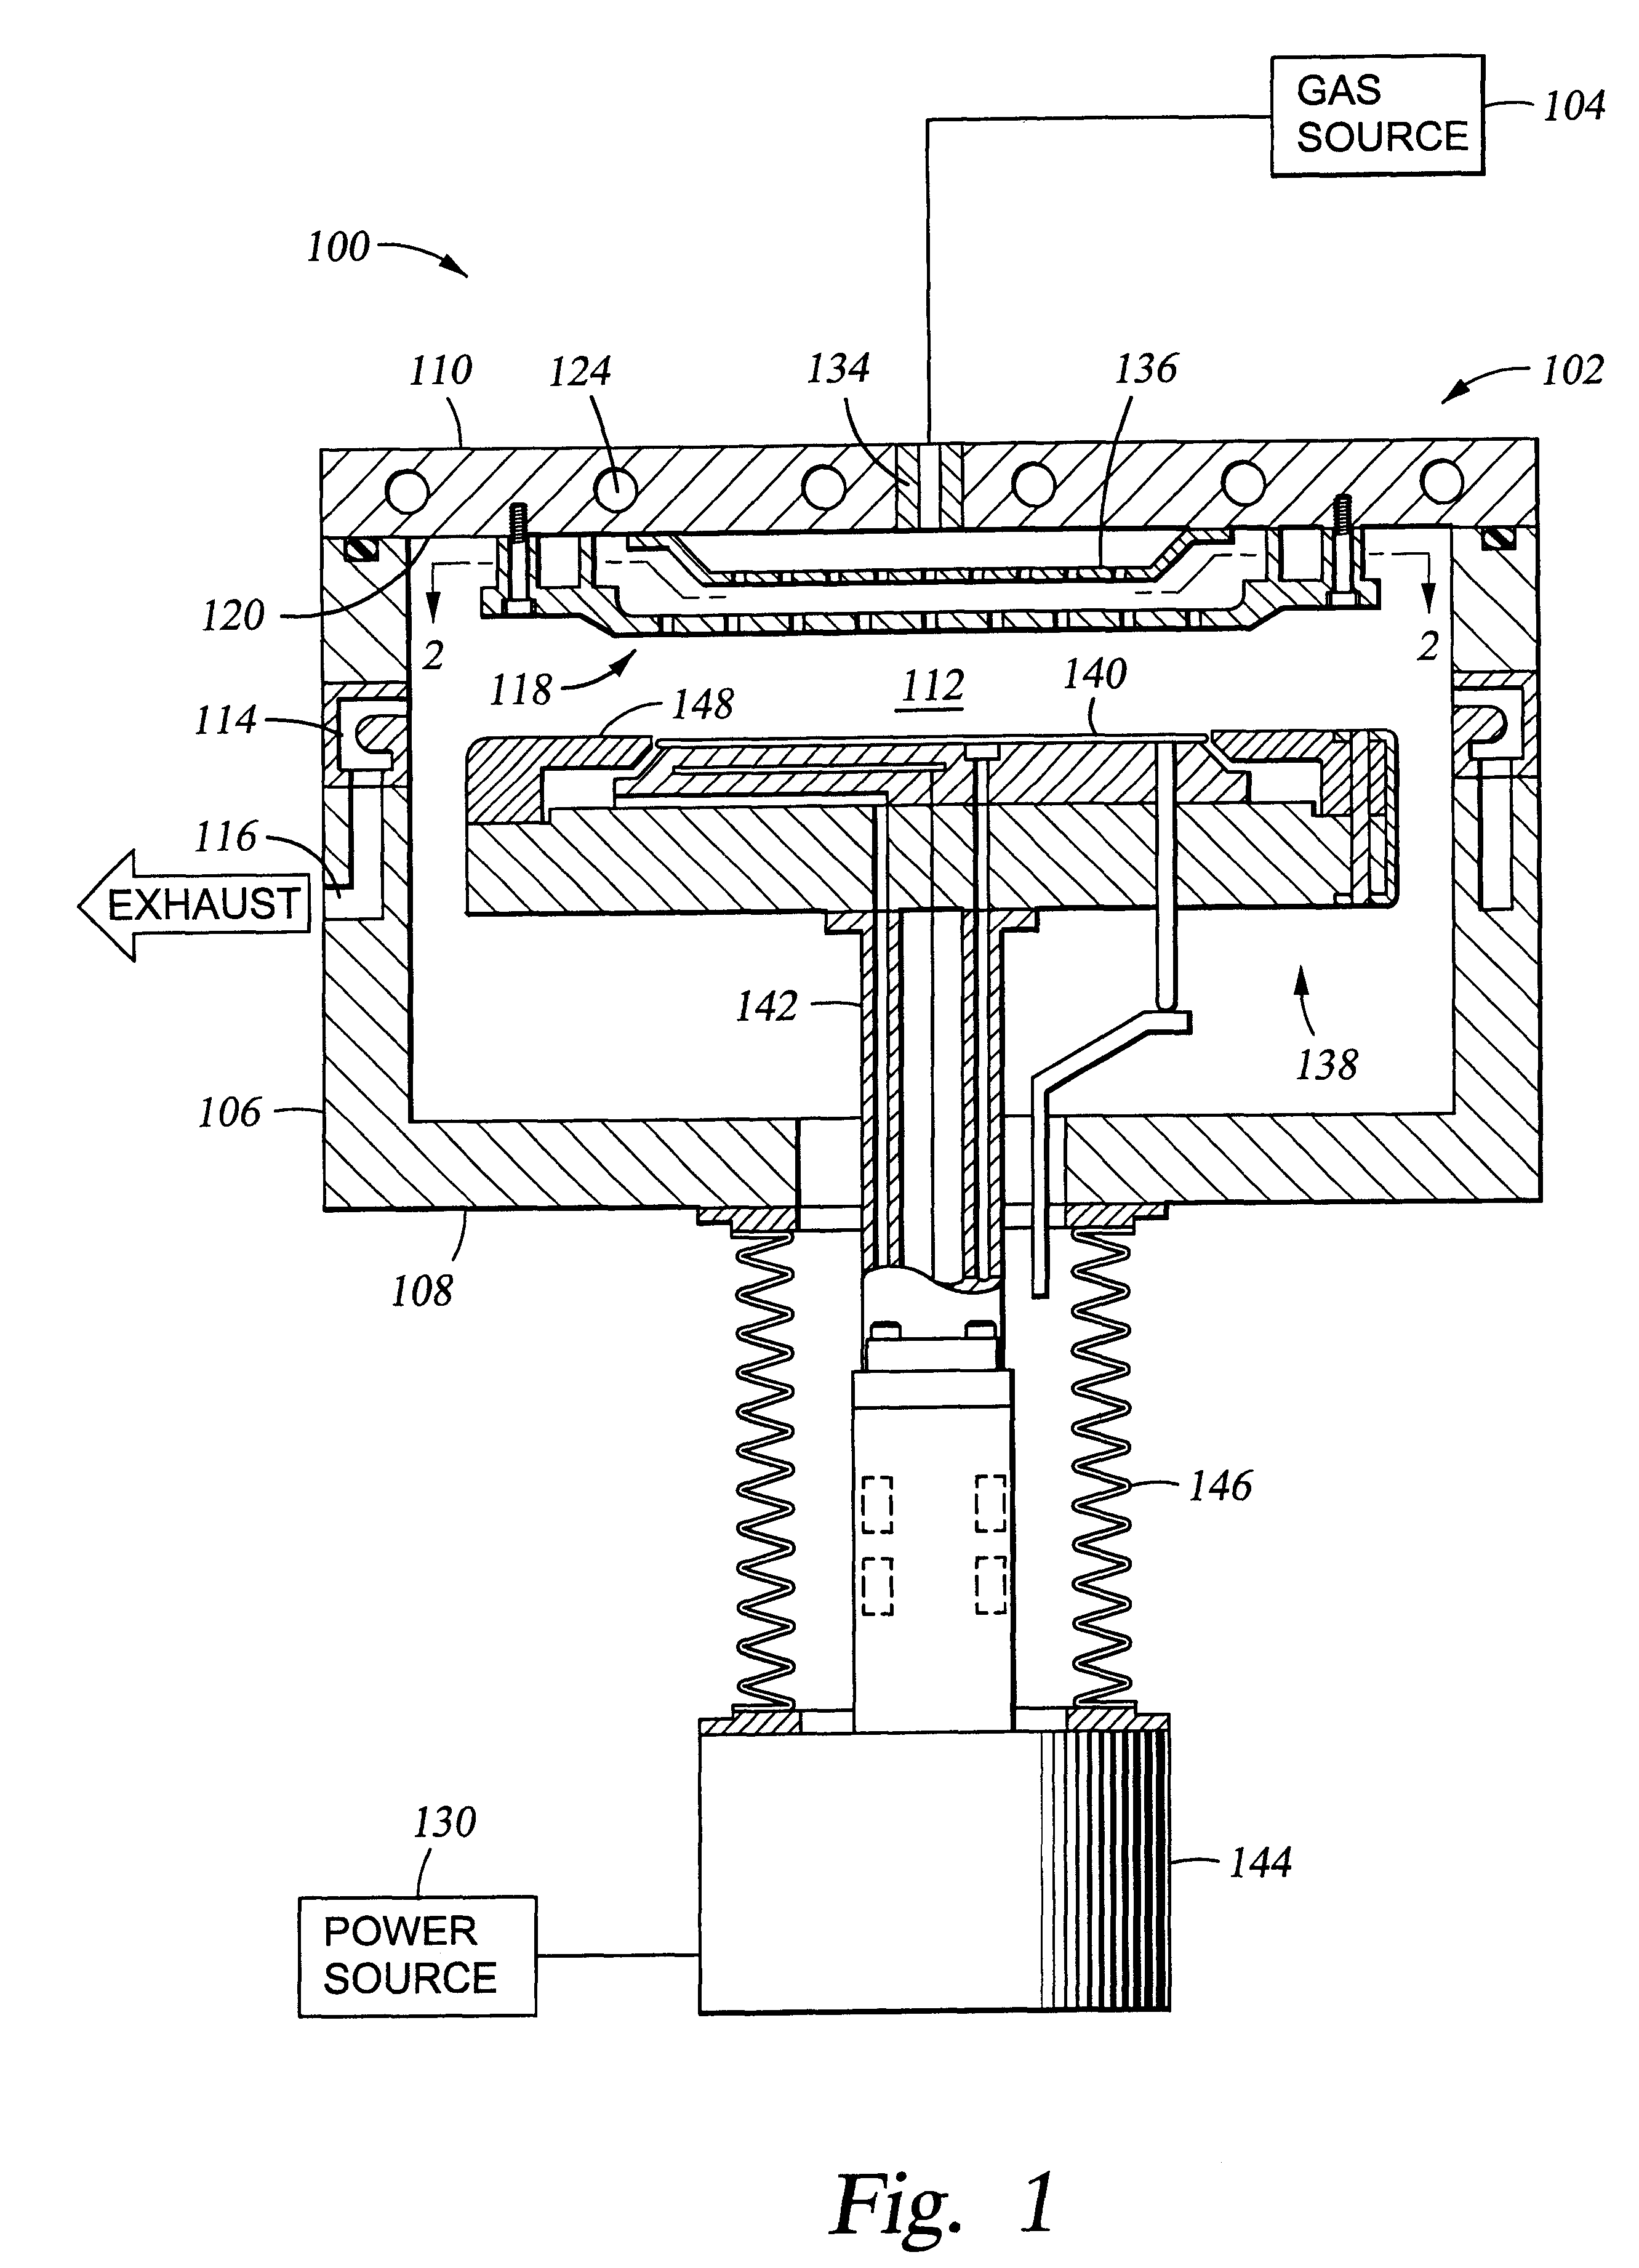 Showerhead with reduced contact area